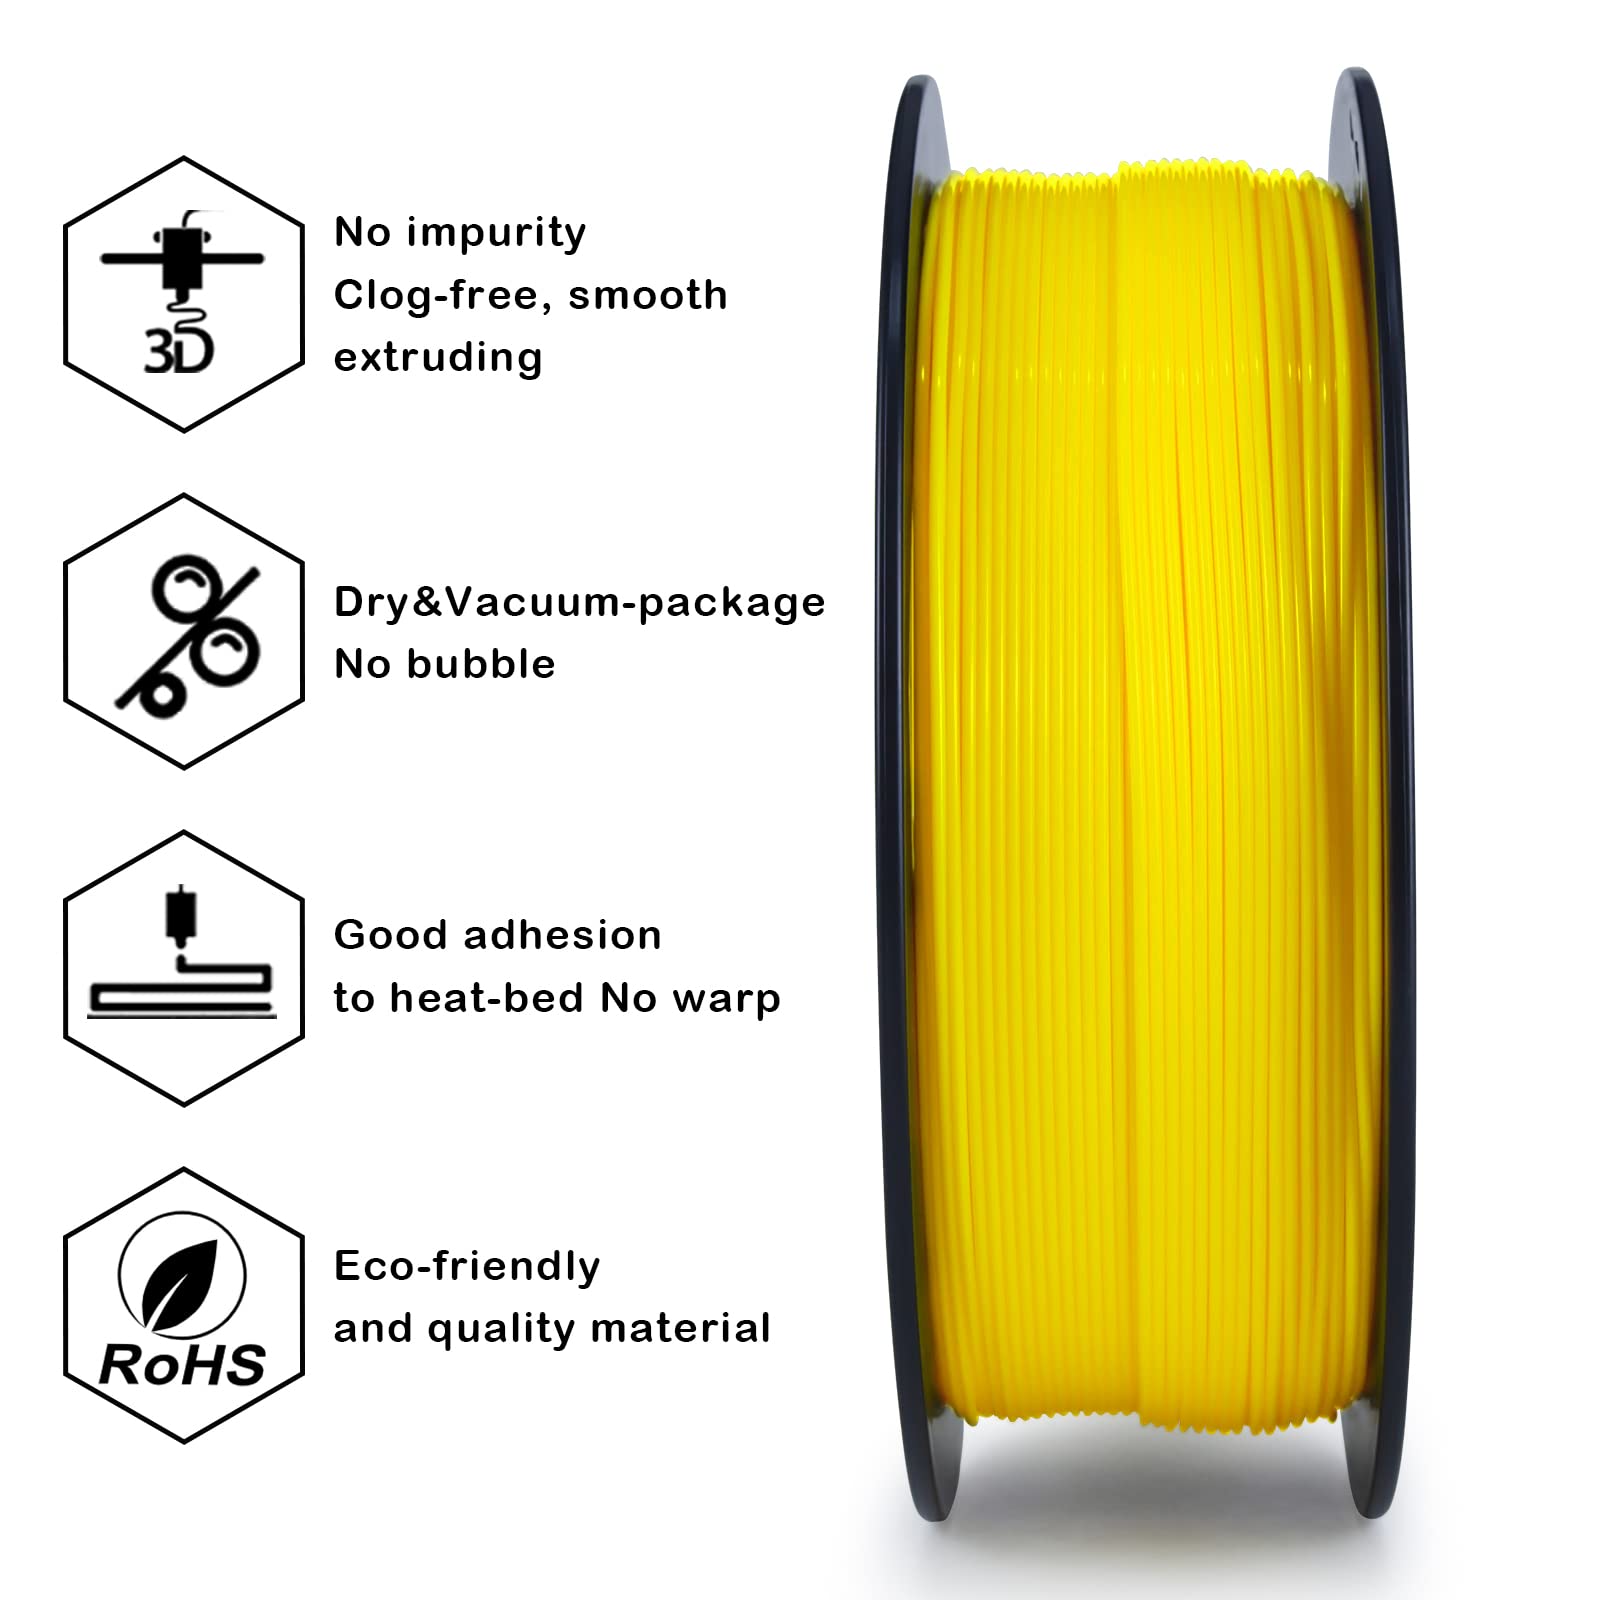 ZIRO PLA Filament 1.75mm, 3D Printer Filament PLA PRO Basic Color Series 1.75MM 1KG(2.2lbs), Dimensional Accuracy and/- 0.03mm, Yellow